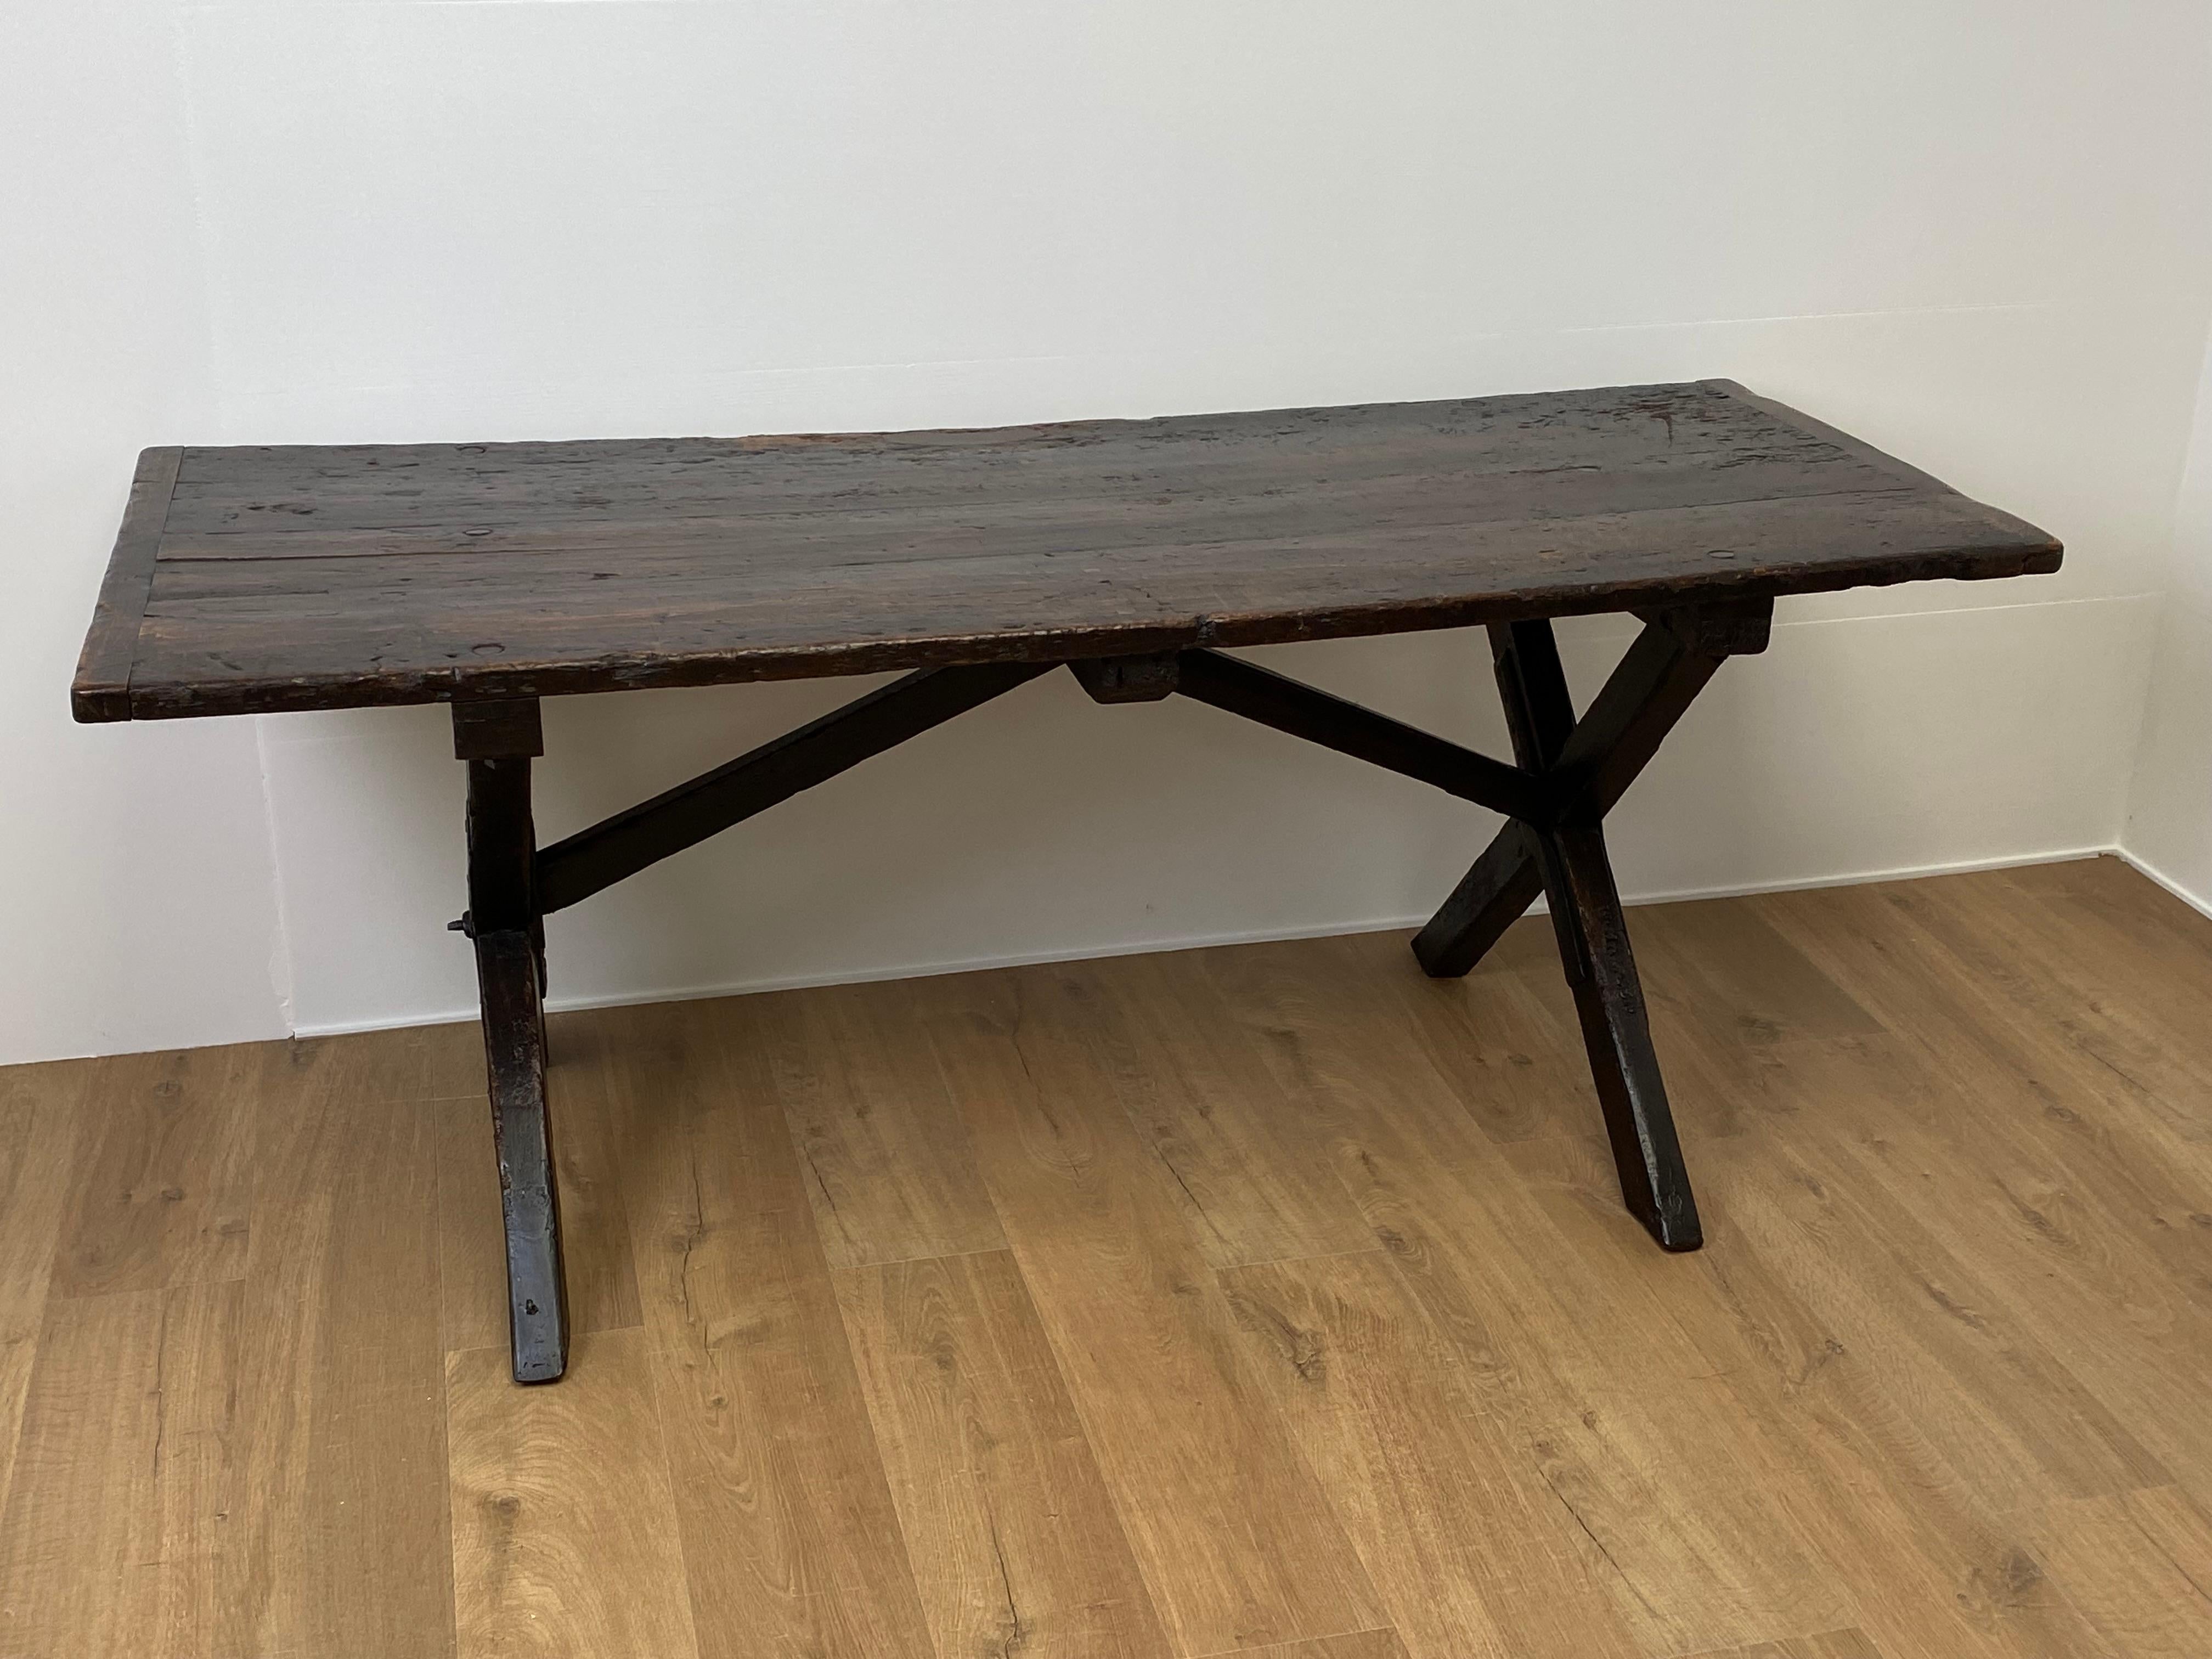 Beautiful Brutalist and rustic, antique English tavern table,
England around 1920,
Very nice old patina and warm and worn shine of the Pine Wood,
One leg has his inscriptions,
Can be used as a table or as a writing desk.
   